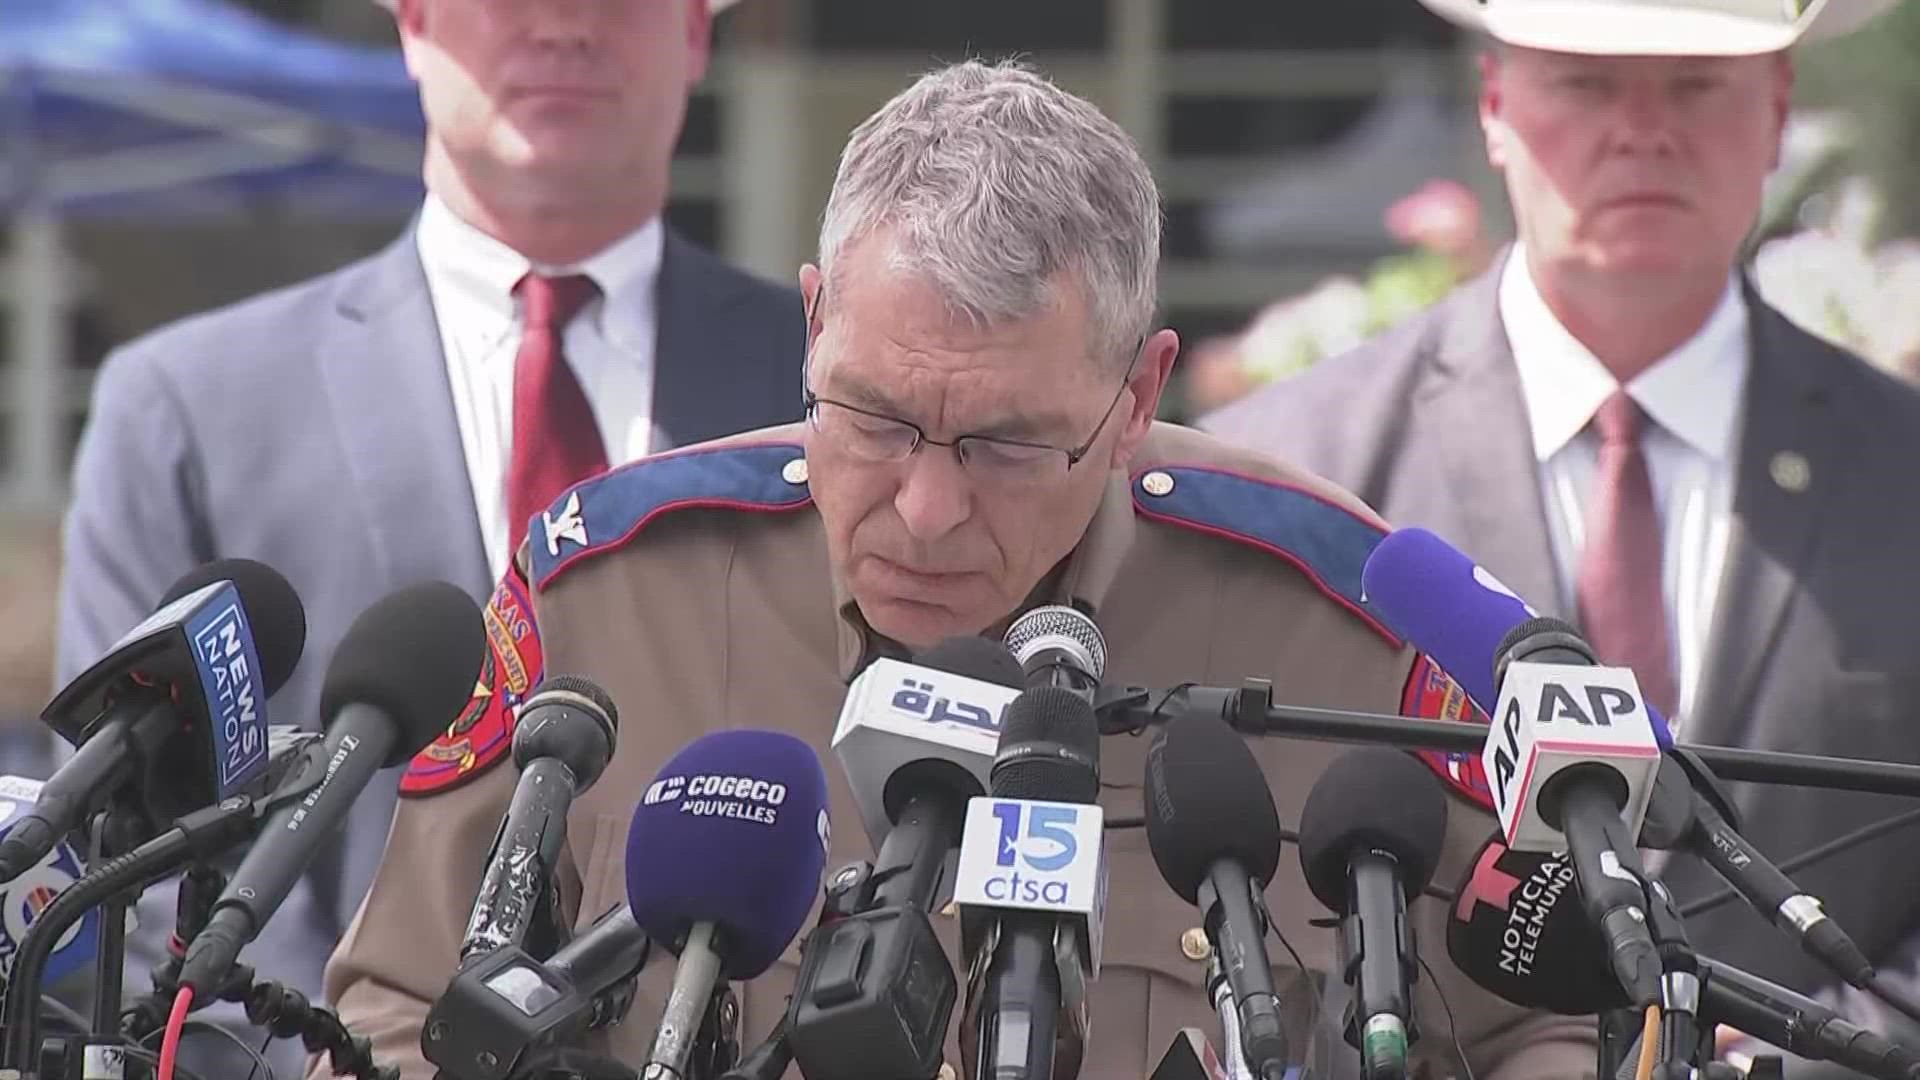 Director of Texas DPS holds briefing on updates in Uvalde school shooting investigation.